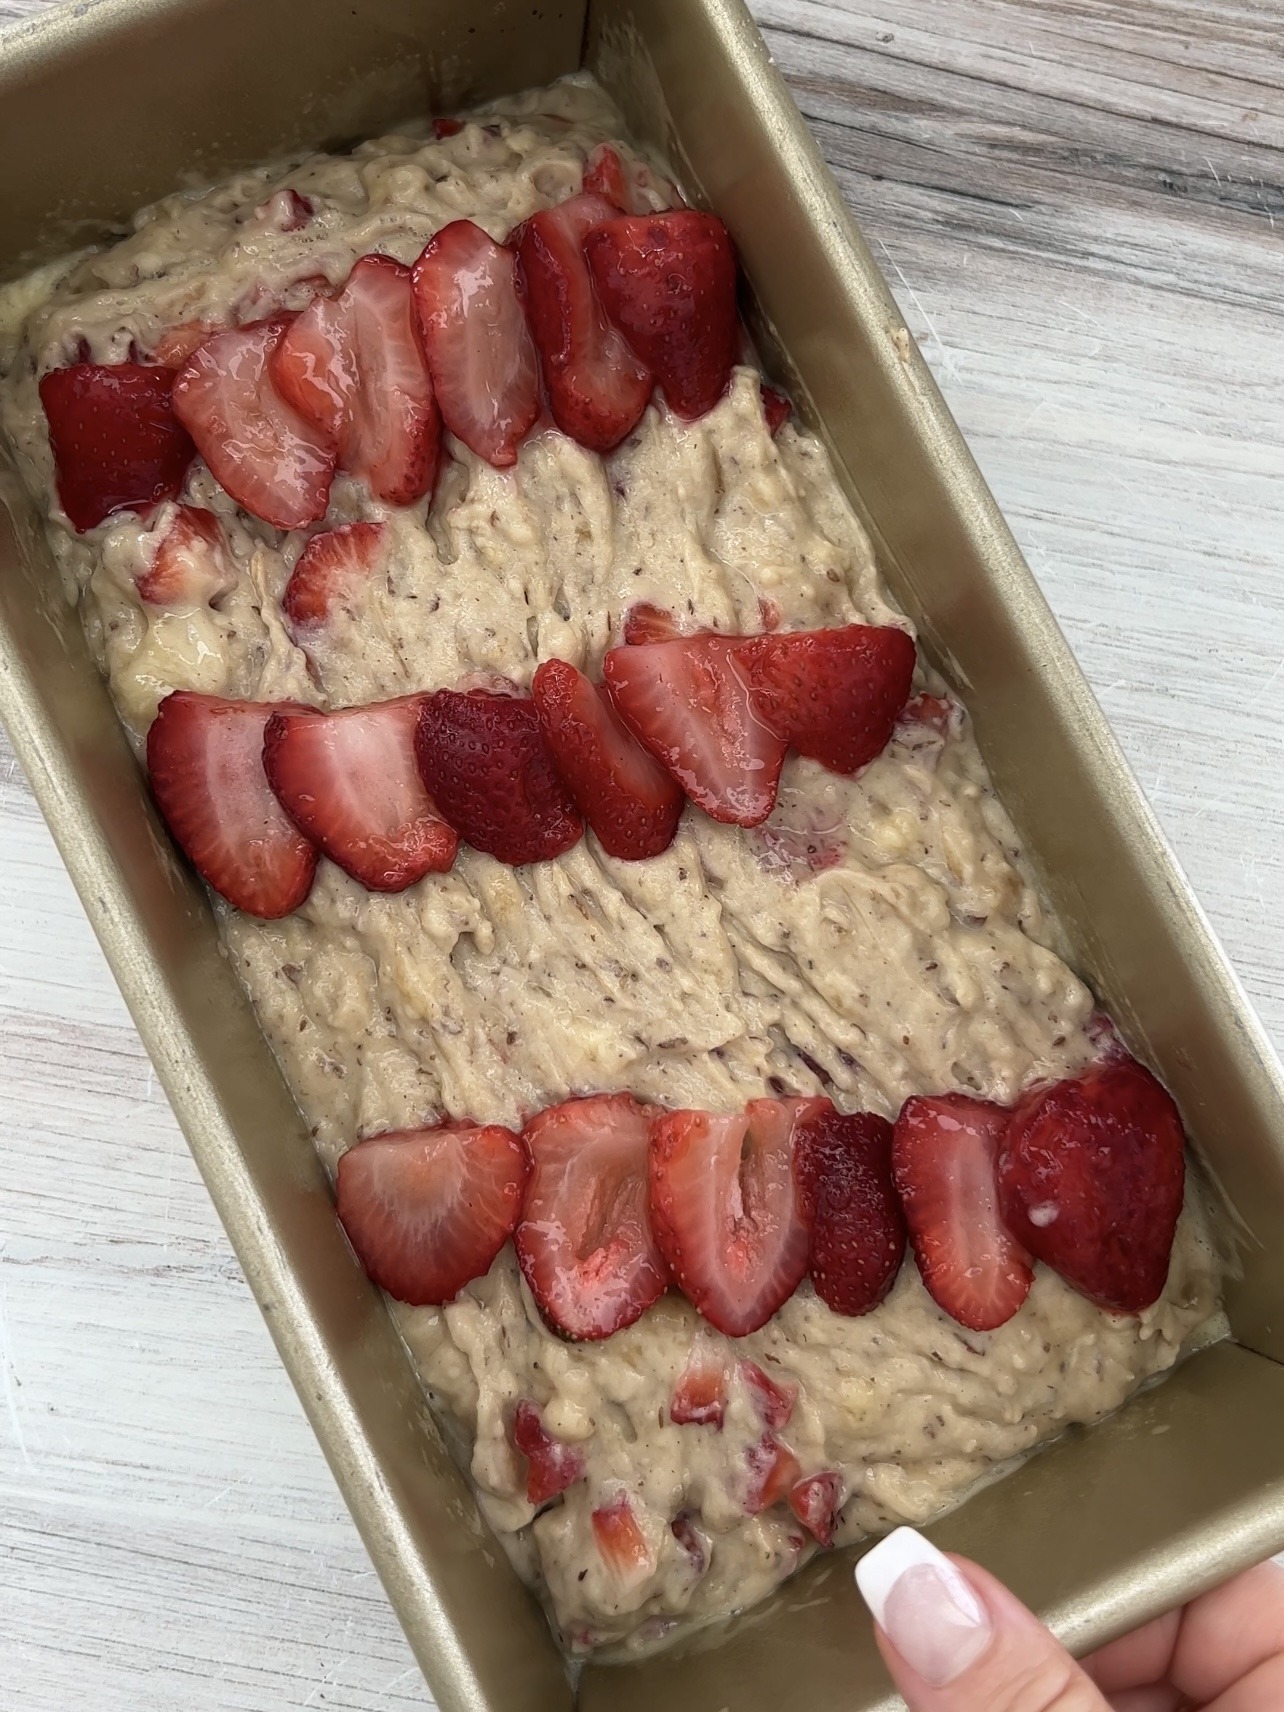 Vegan Strawberry Banana Bread

Step 4: Fold in the diced strawberries and then transfer the mixture into a greased metal loaf pan or a standard metal round pan. You may decorate the top of the strawberry banana bread with strawberries if you'd like.